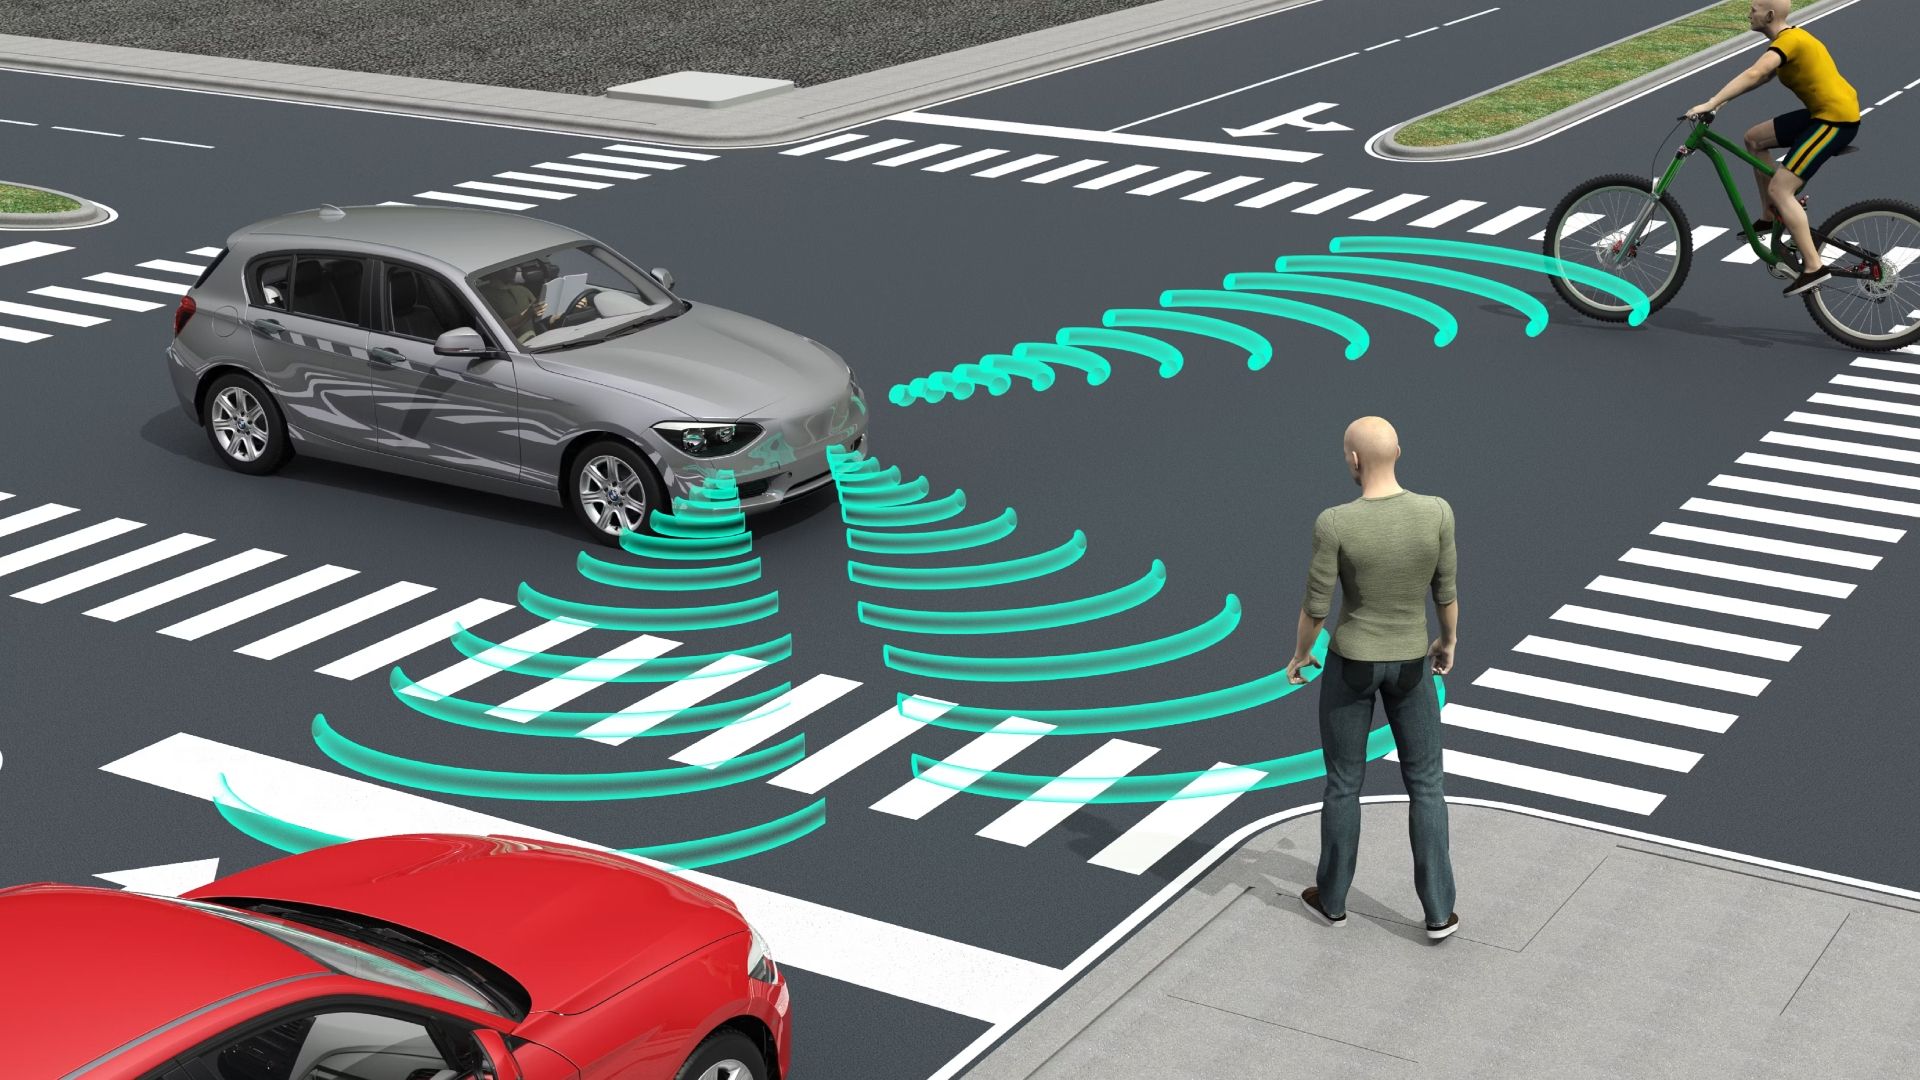 Self-driving car scanning for objects around 